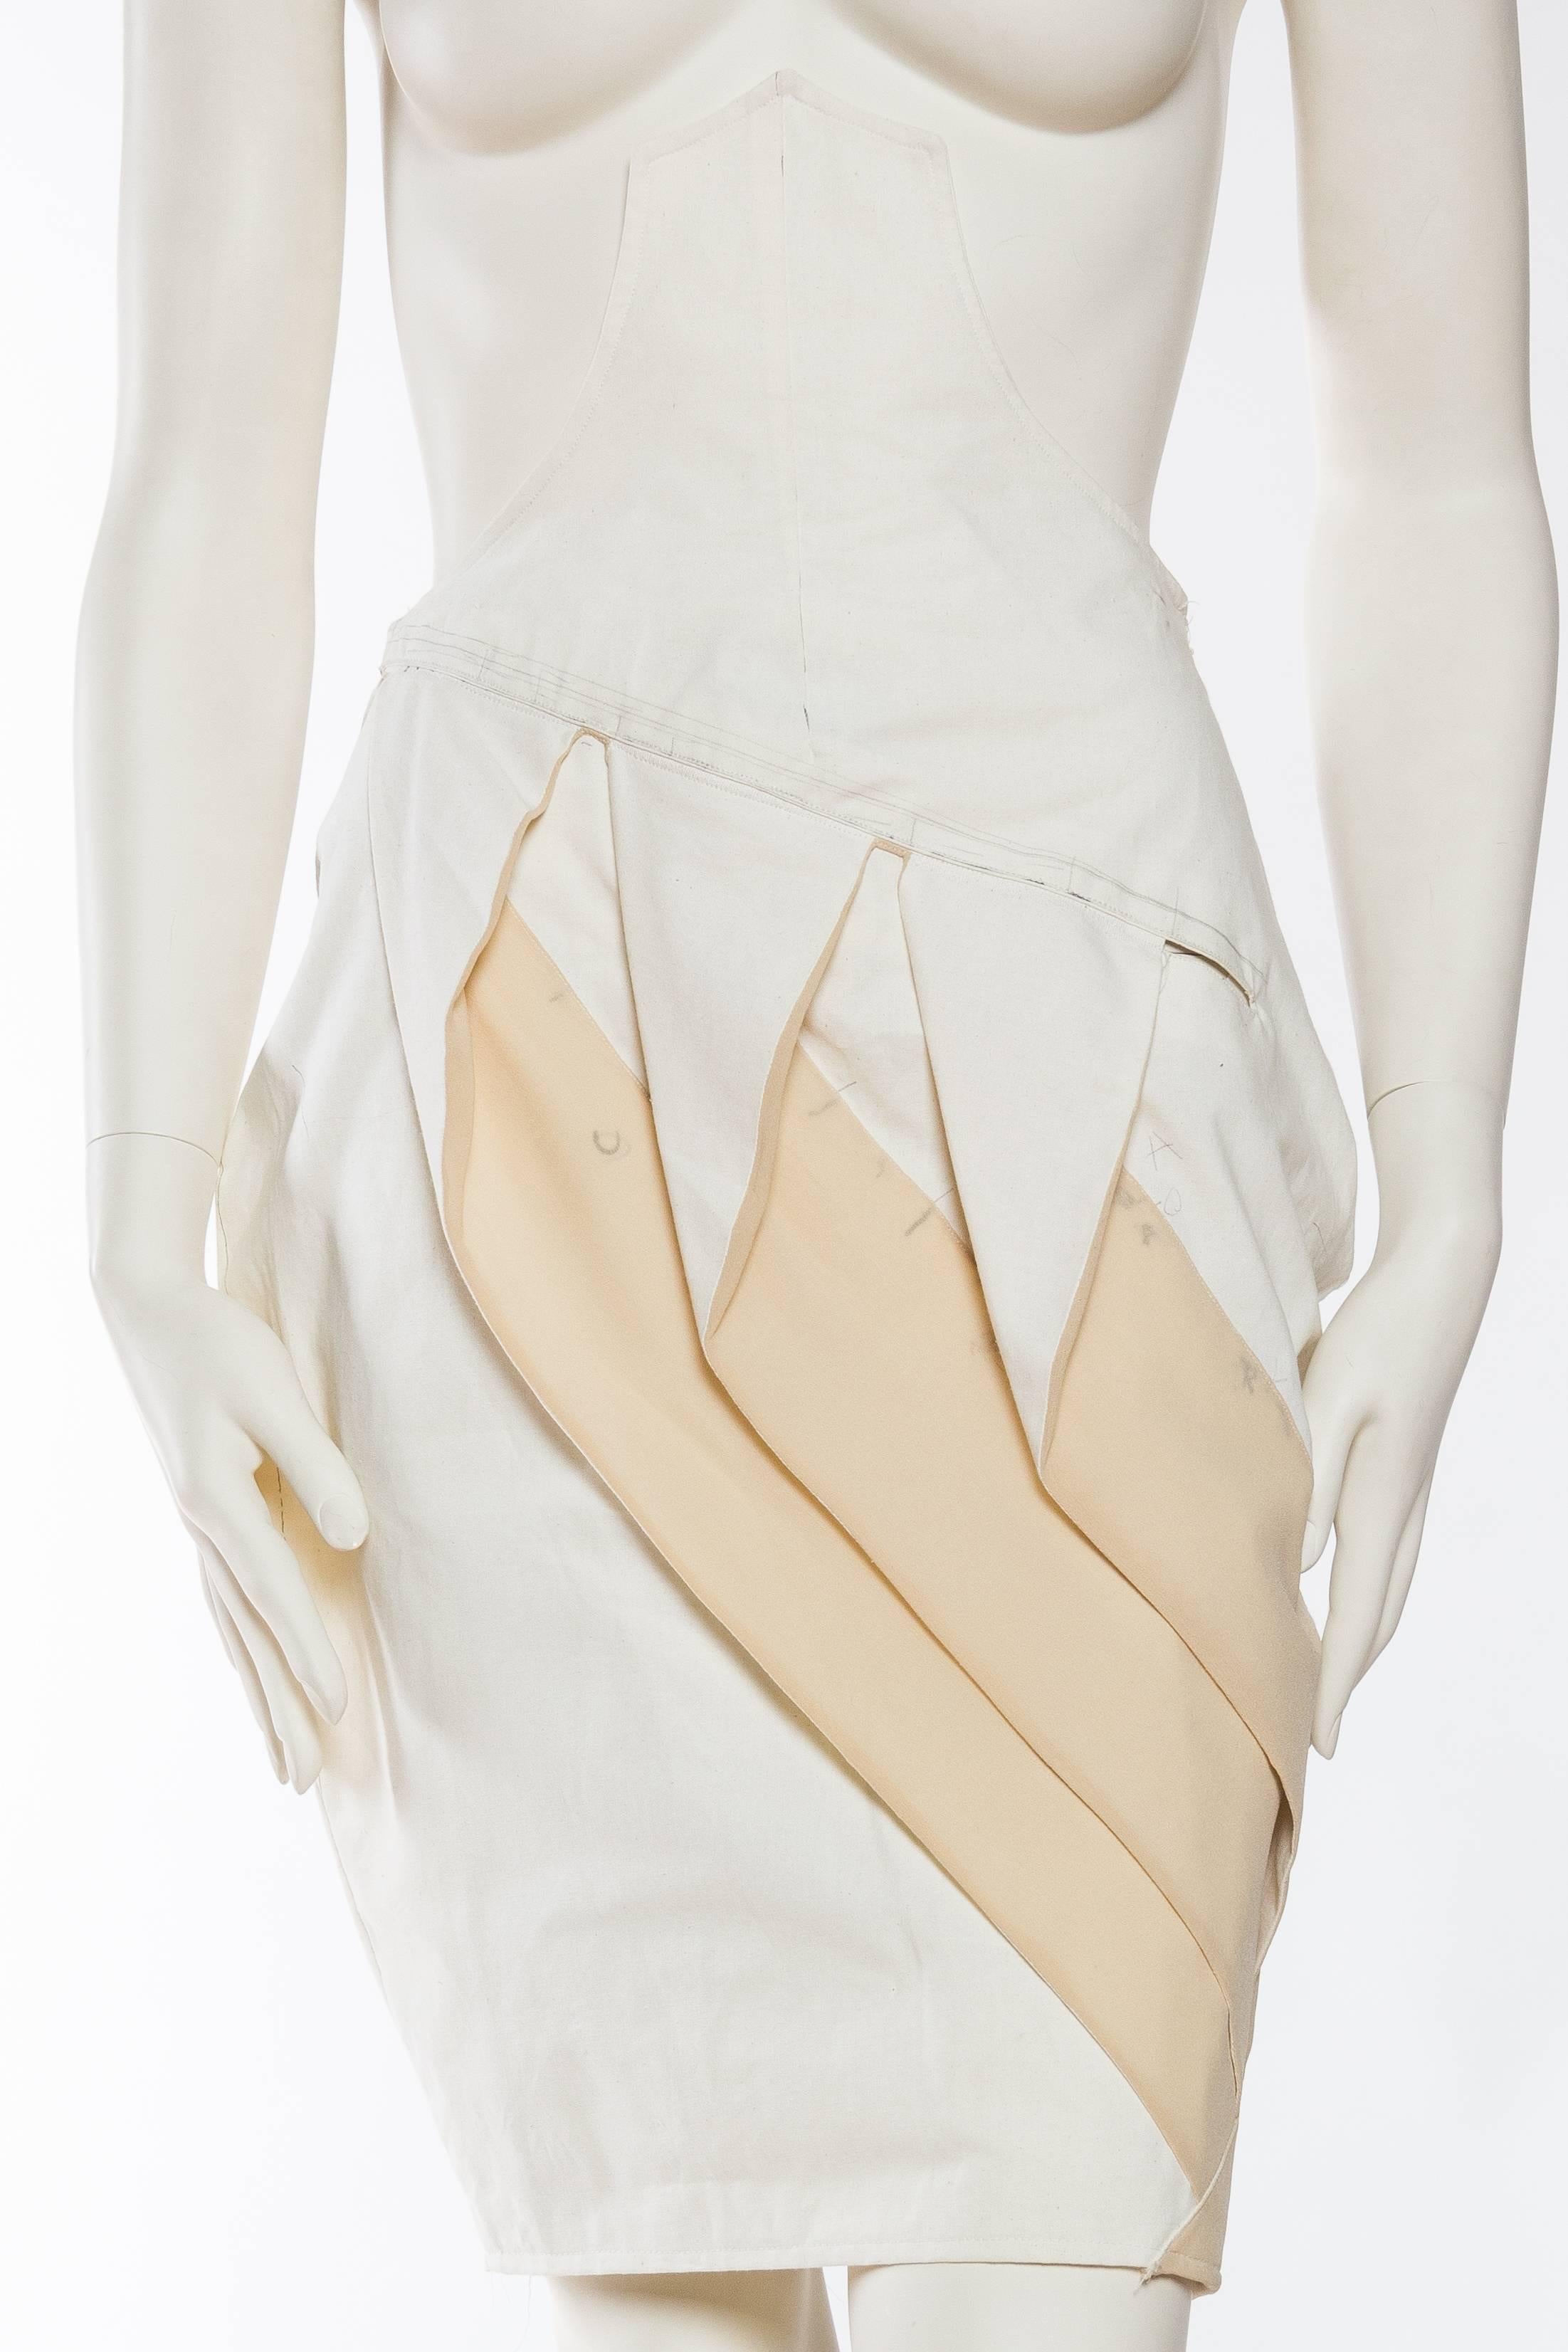 Beige 2000S JOHN GALLIANO Working Muslin Sample Skirt From Galliano's Archive For Sale